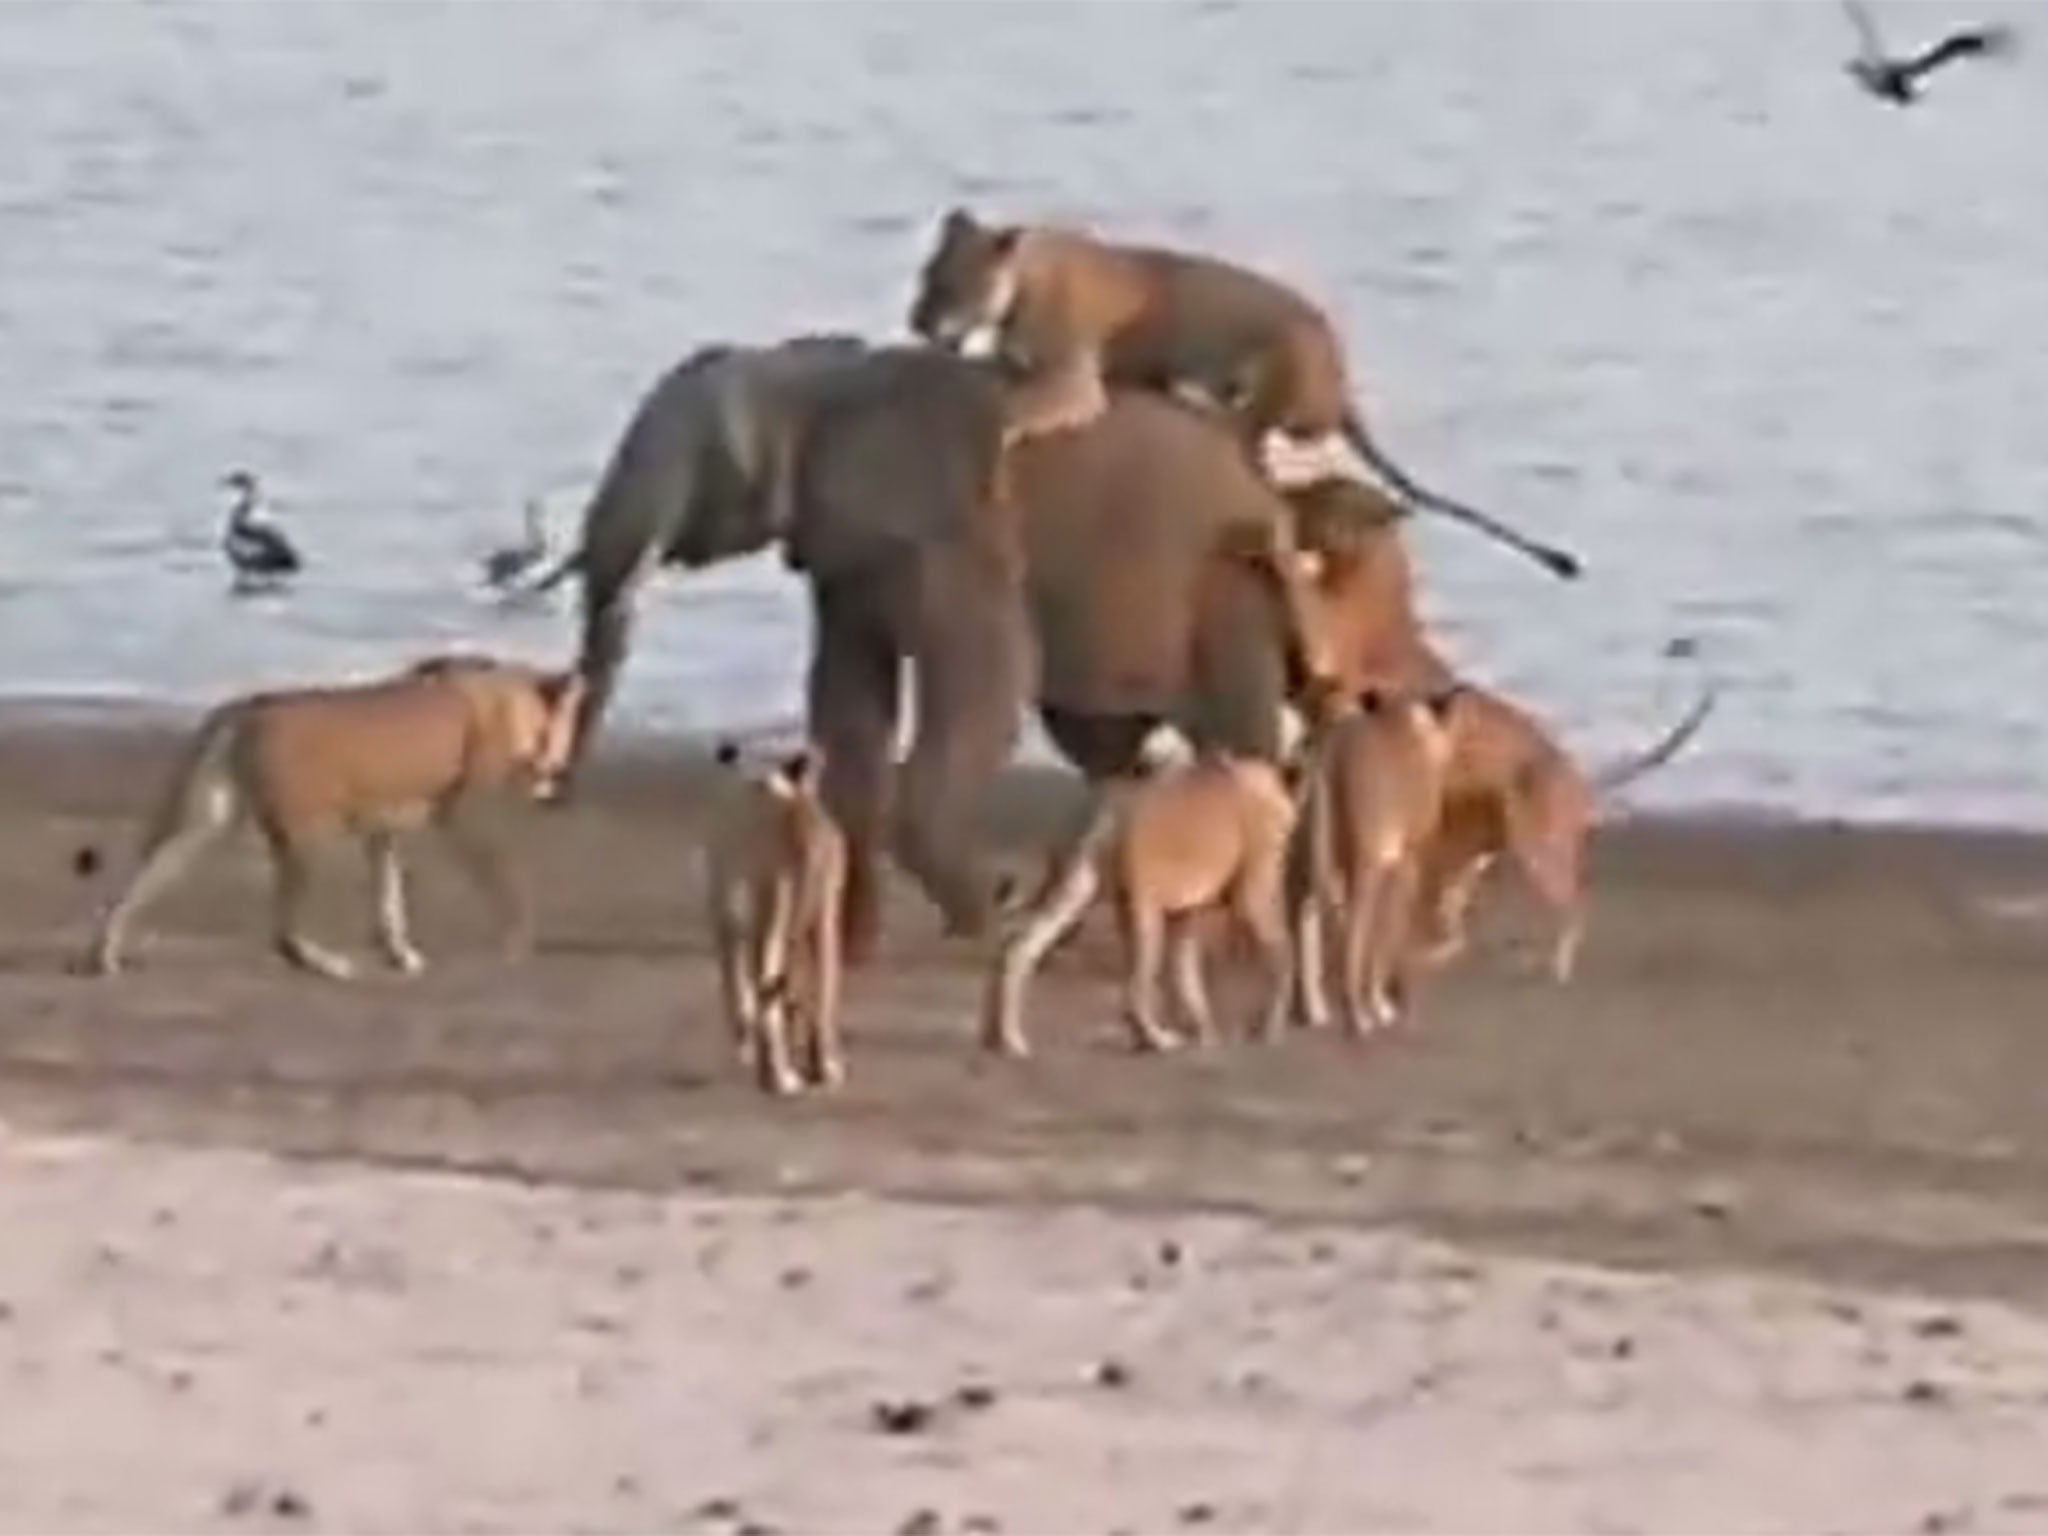 Video footage from Zambia shows the amazing moment a young elephant miraculously fought off a 14 member fried of female lions in Zambia.